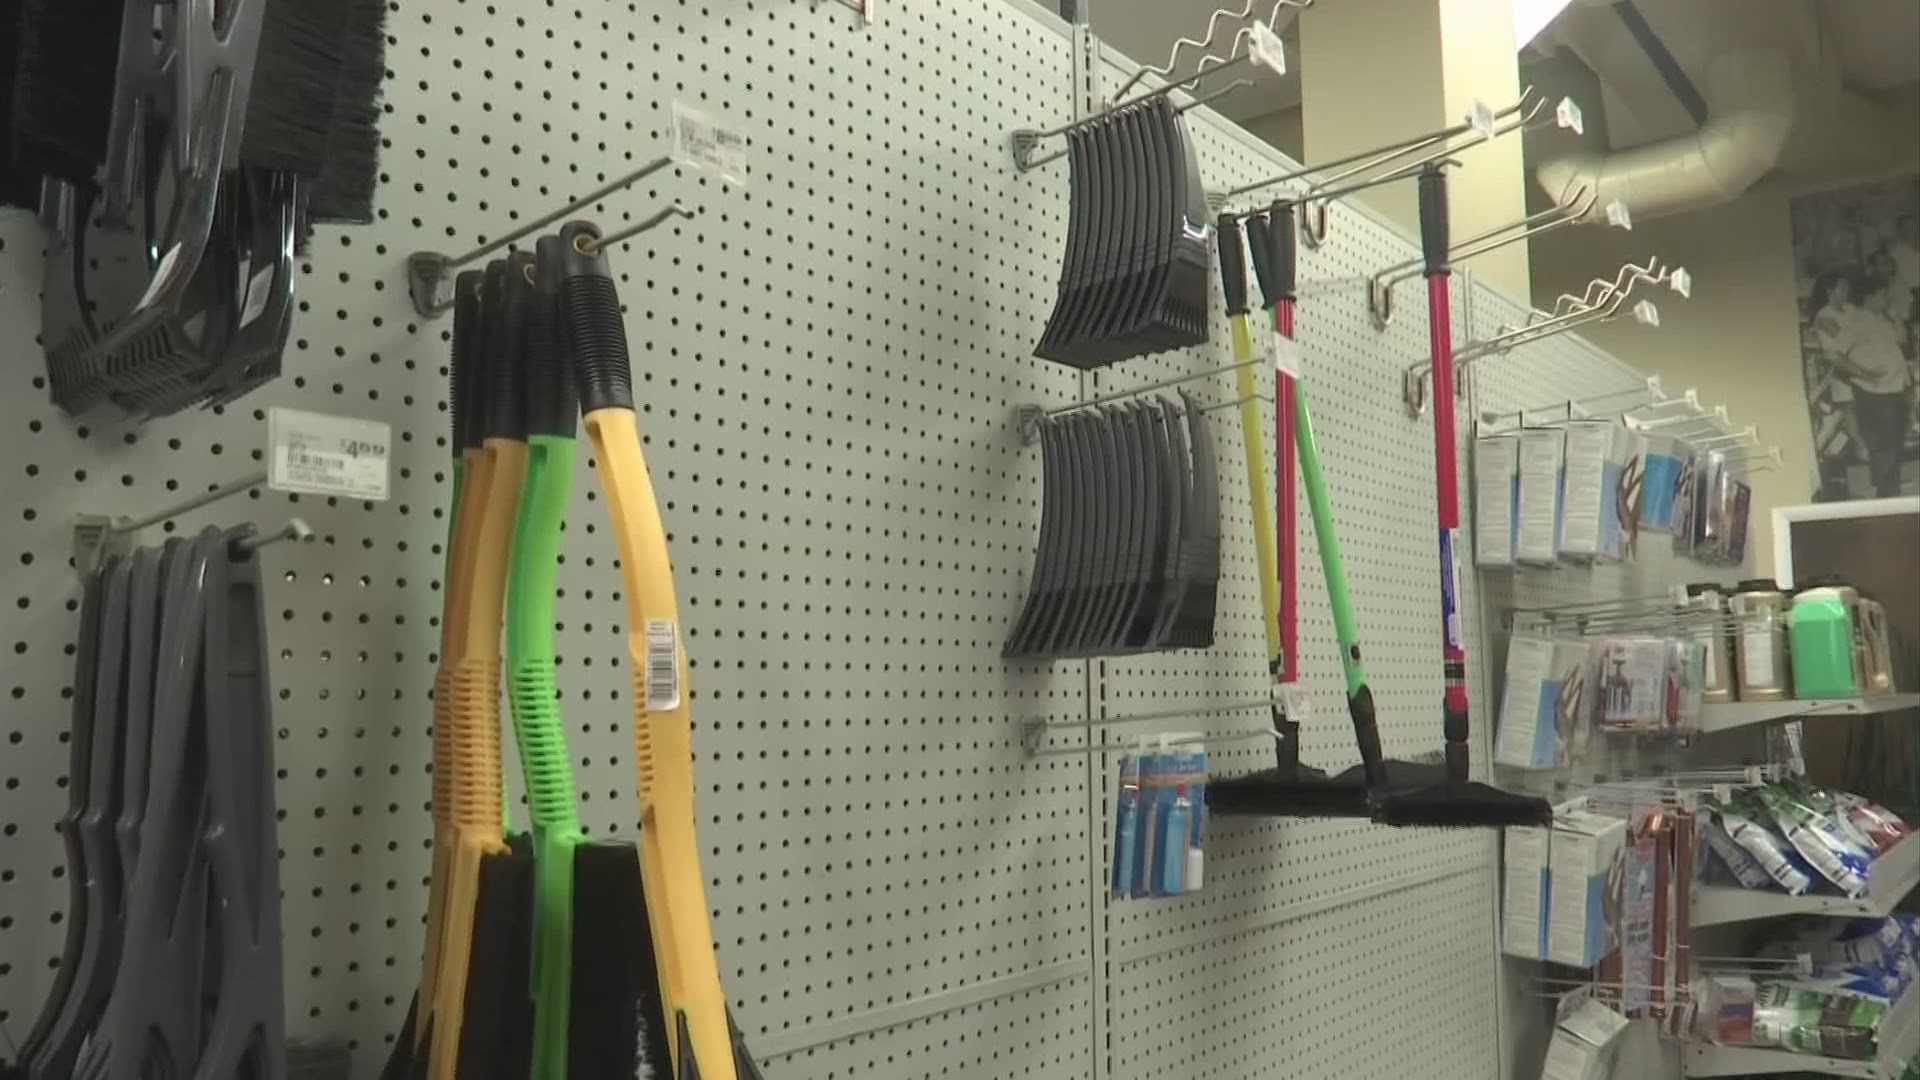 Grocery stores aren't the only busy places helping people prepare for the winter storm.